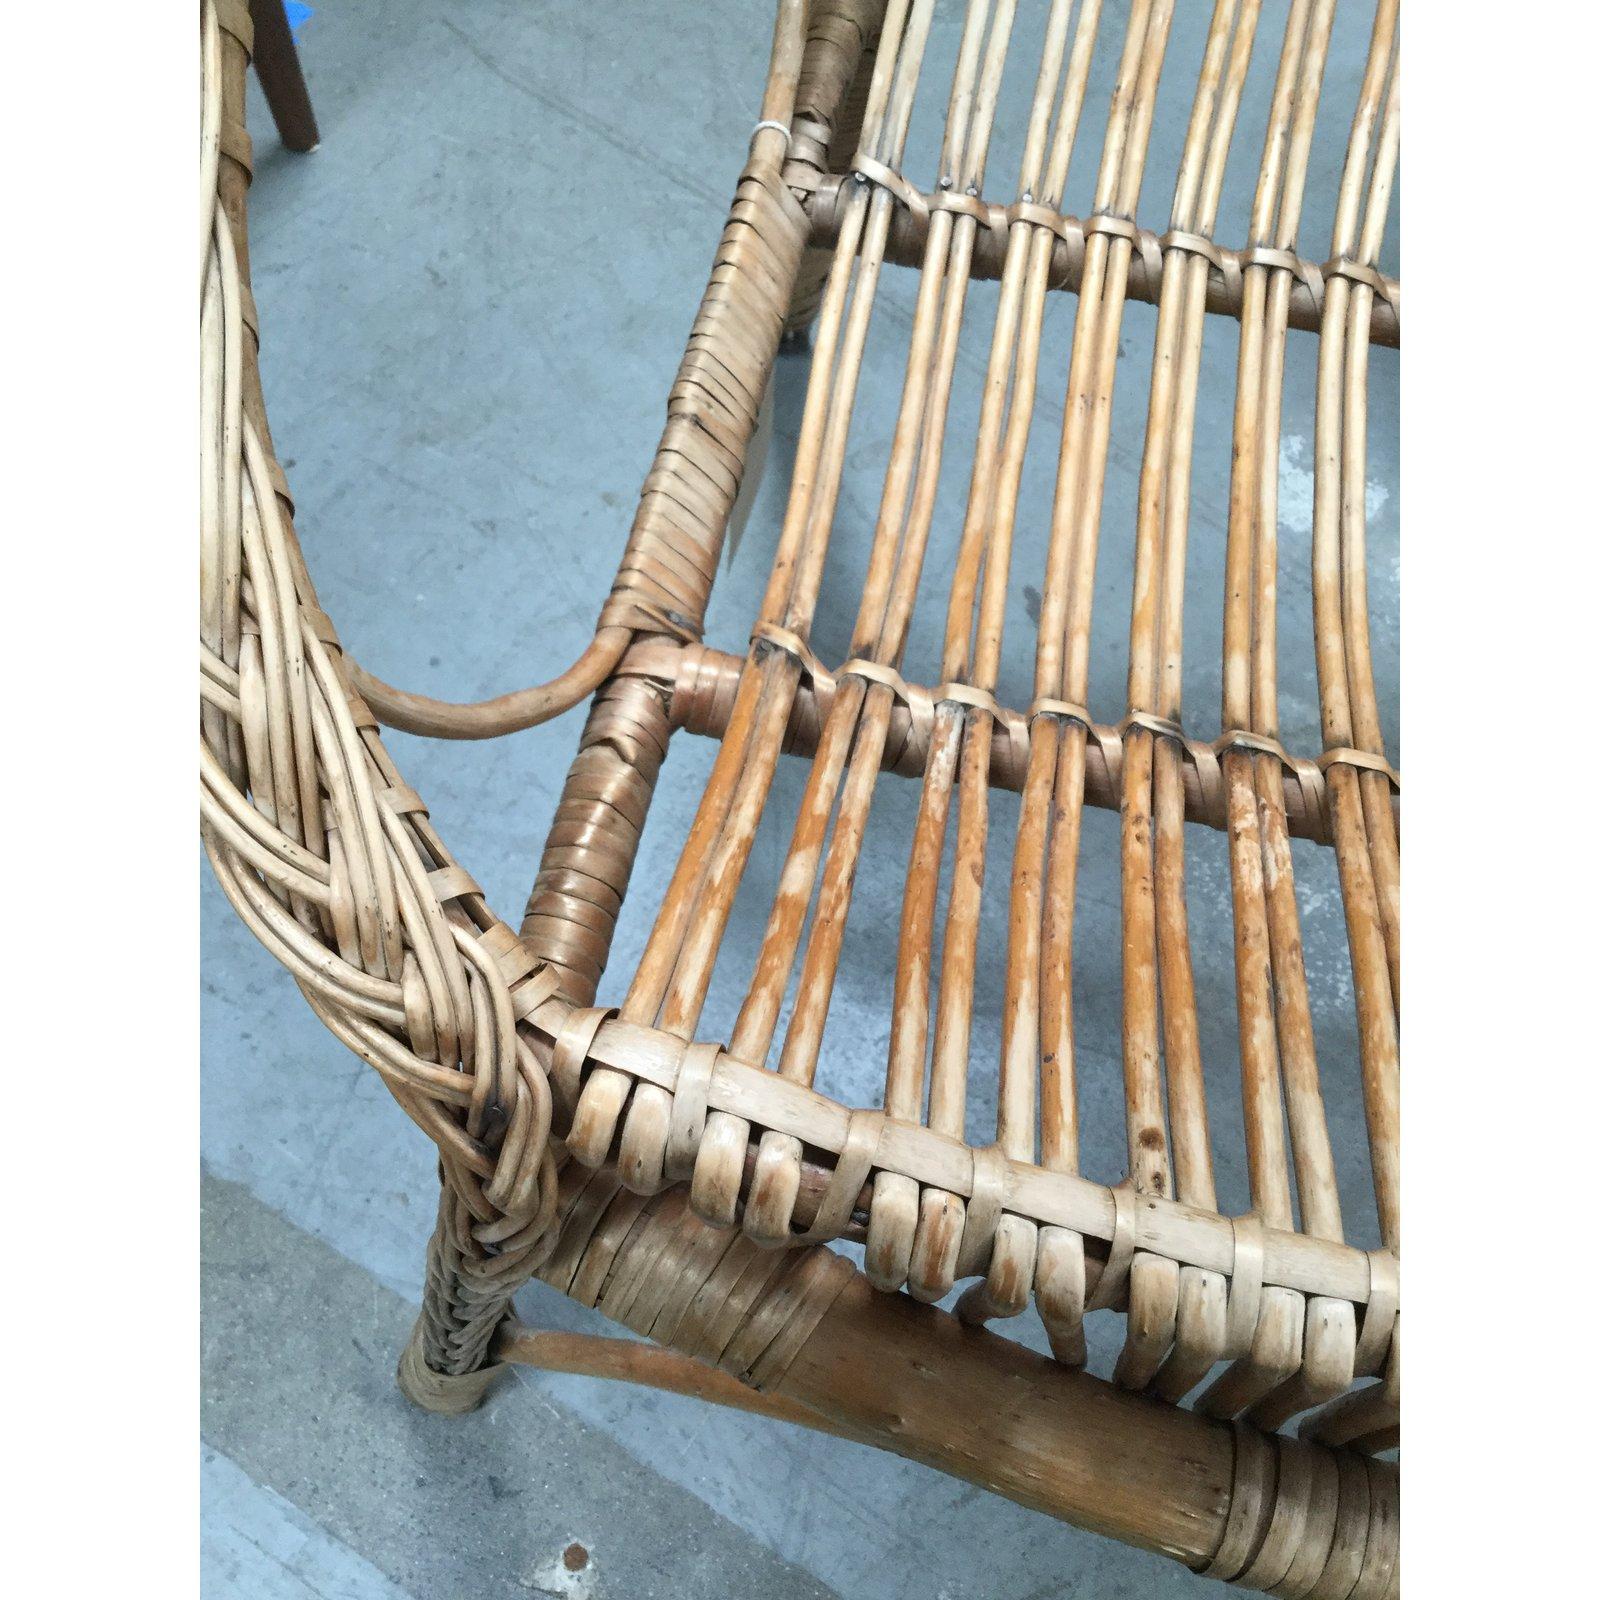 Boho chic rattan chair from the 1950s. In great condition!